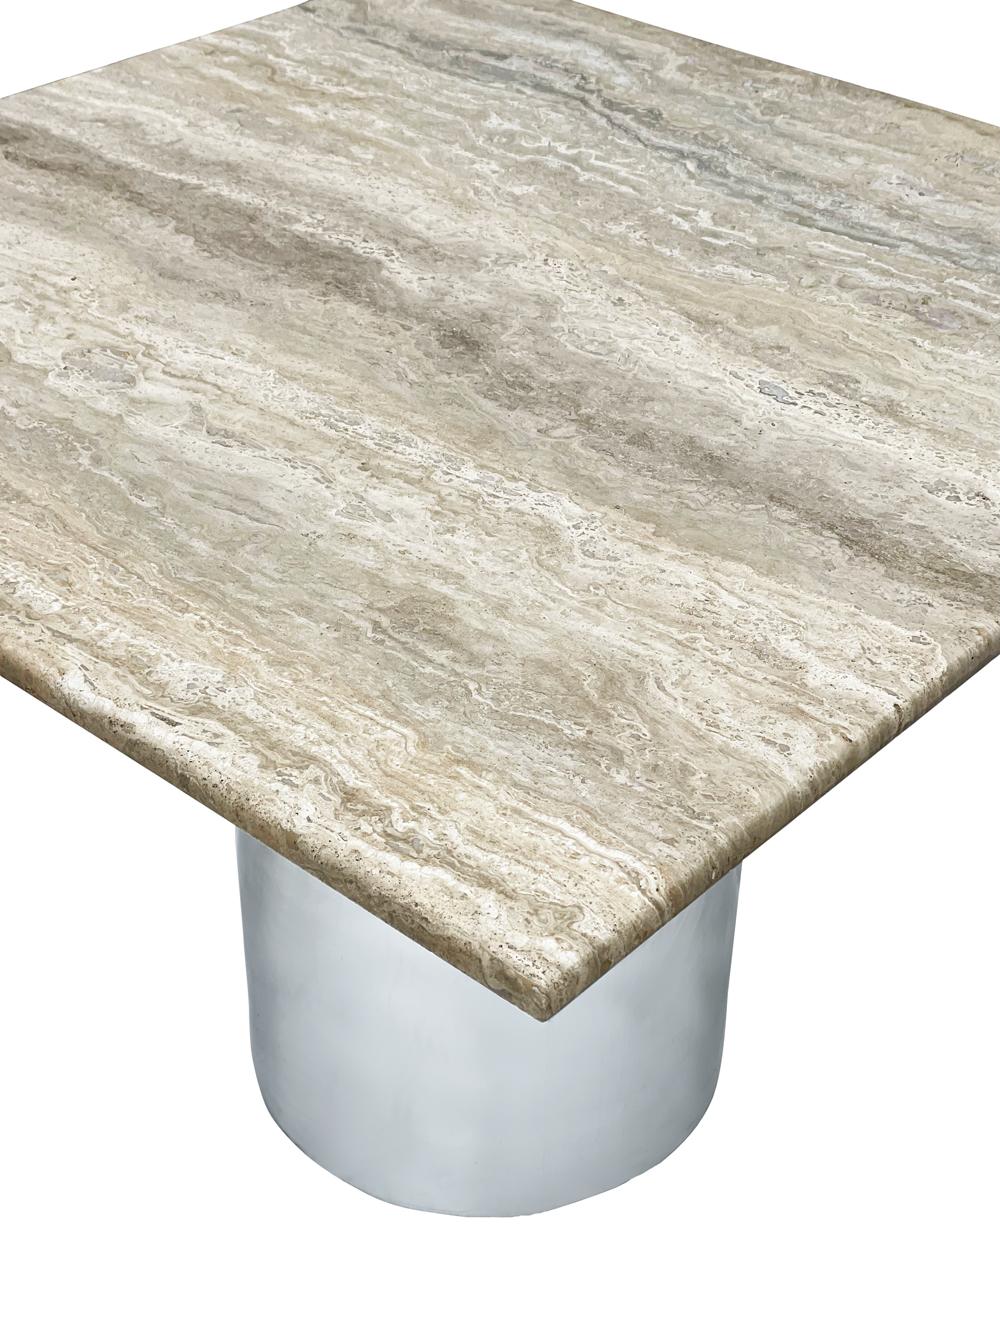 Late 20th Century Mid Century Italian Post Modern Travertine Marble Dining Table with Steel Base For Sale